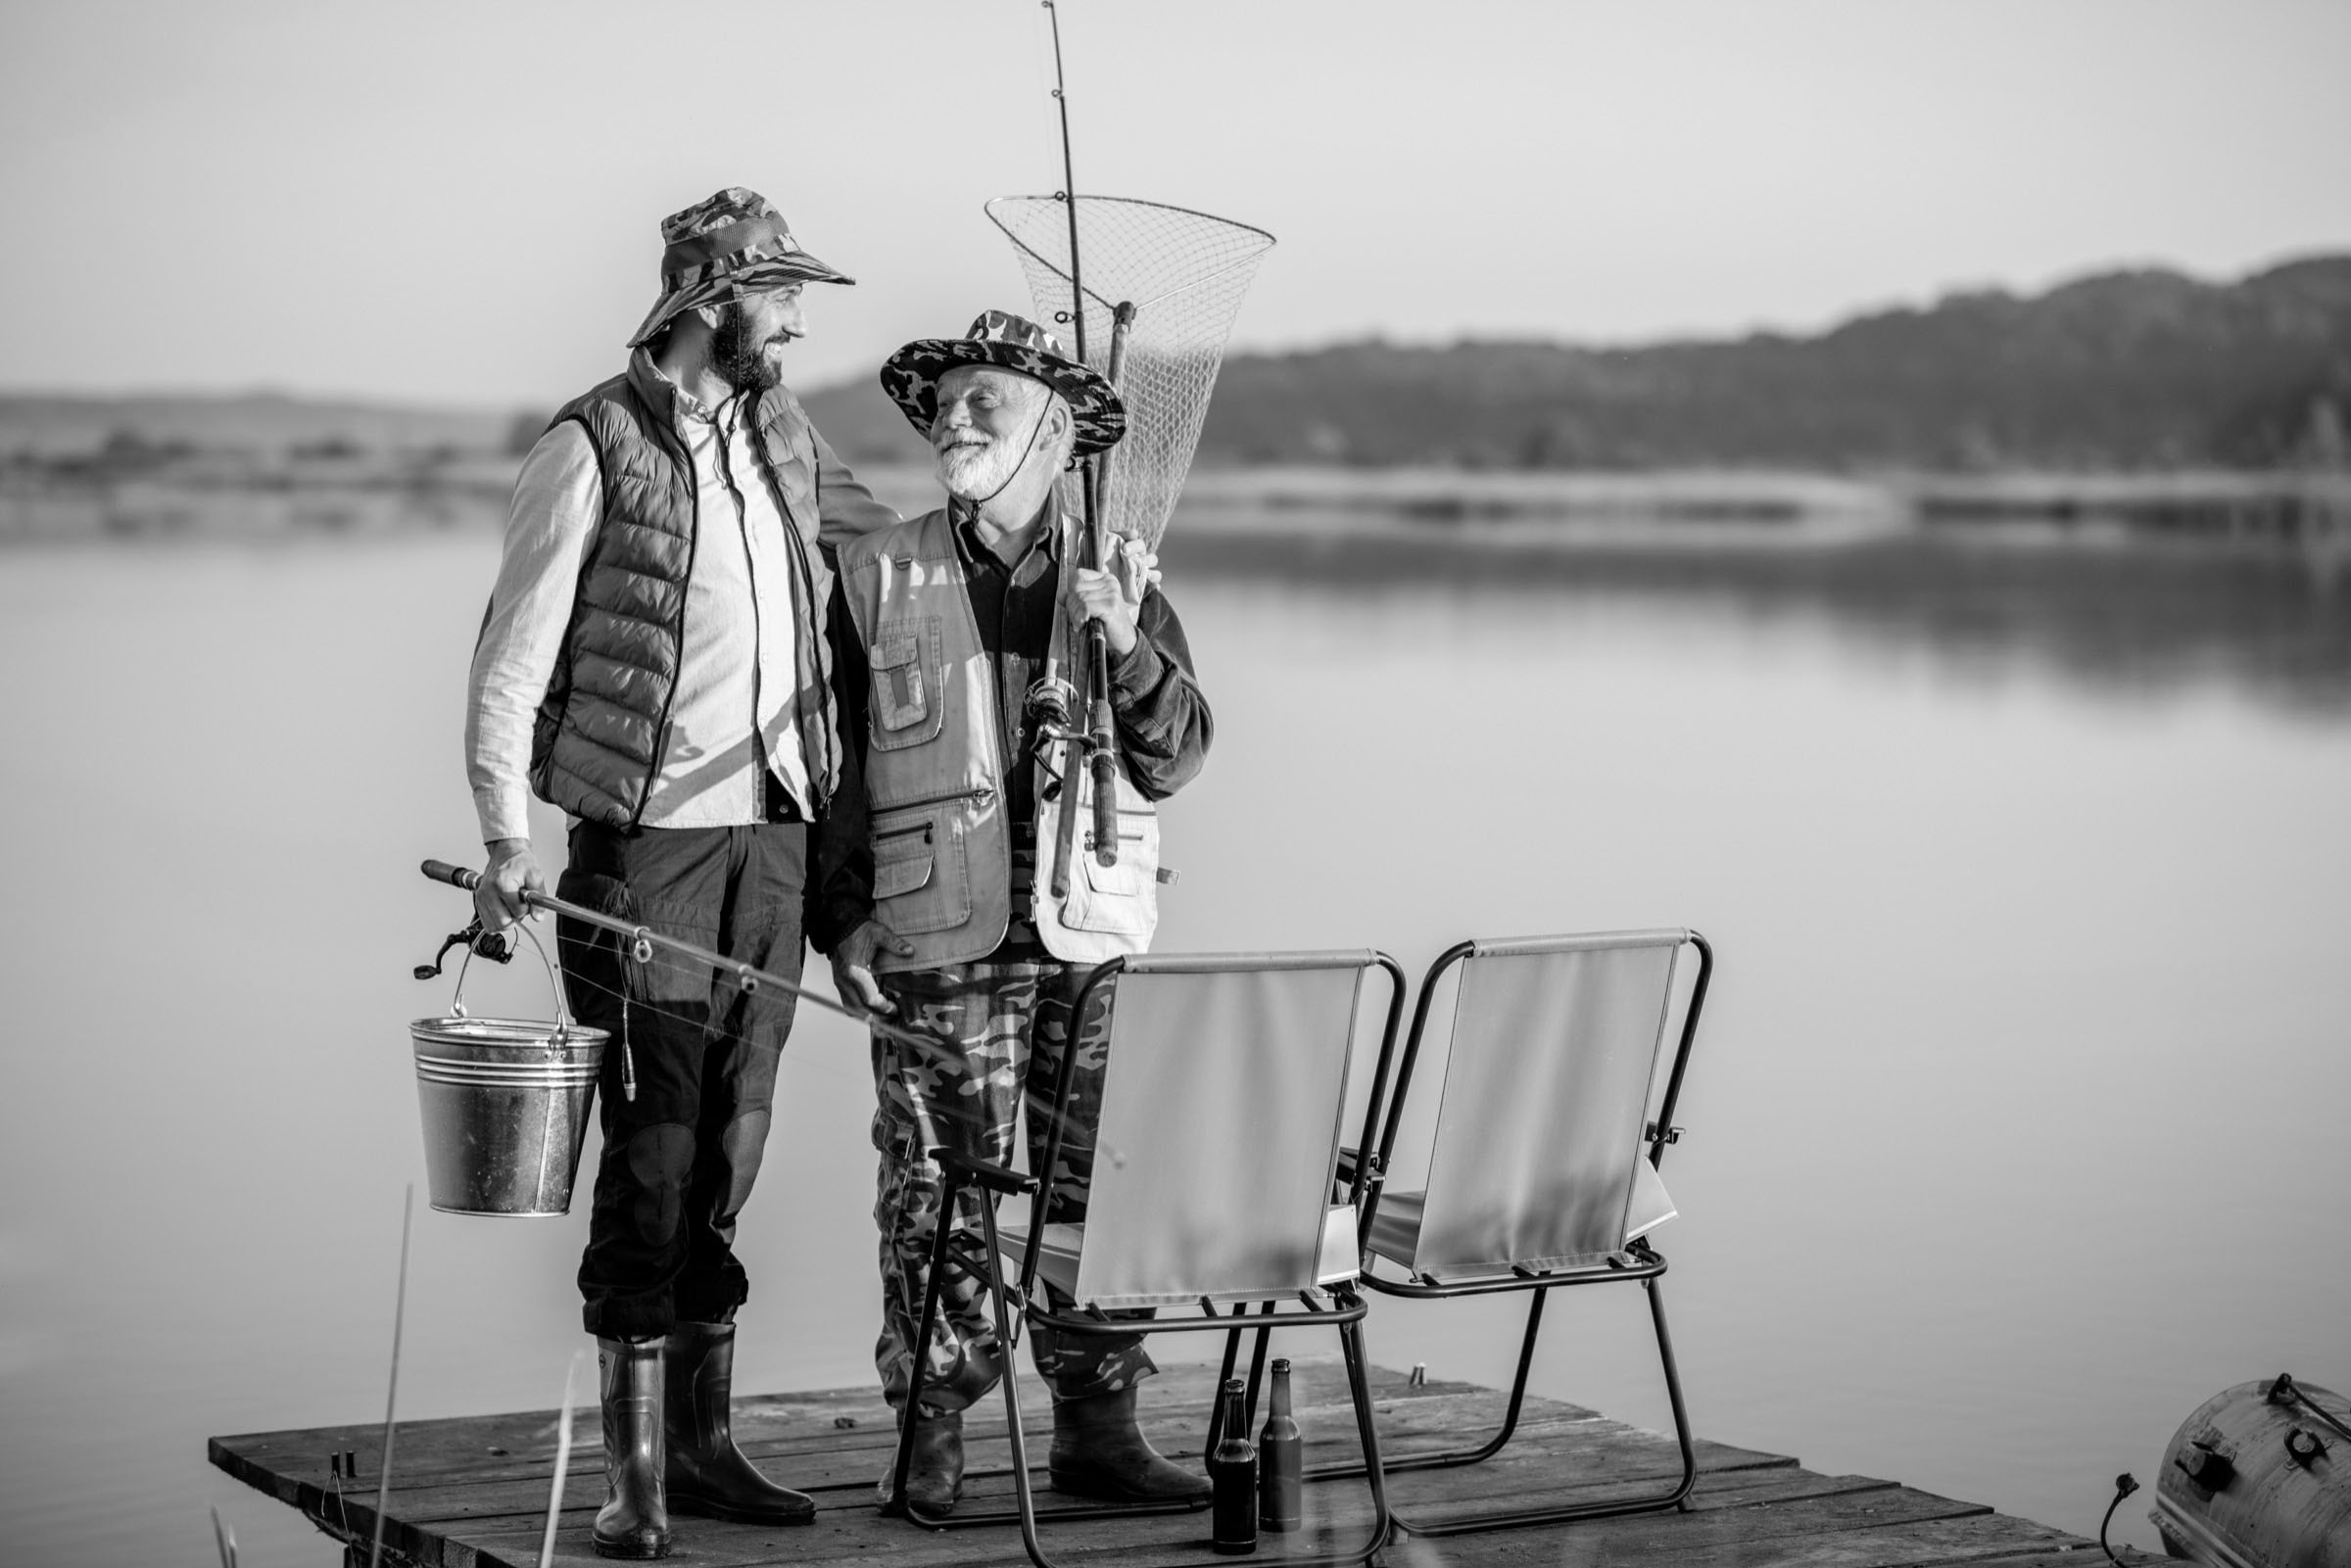 Grandfather with adult son fishing on the lake